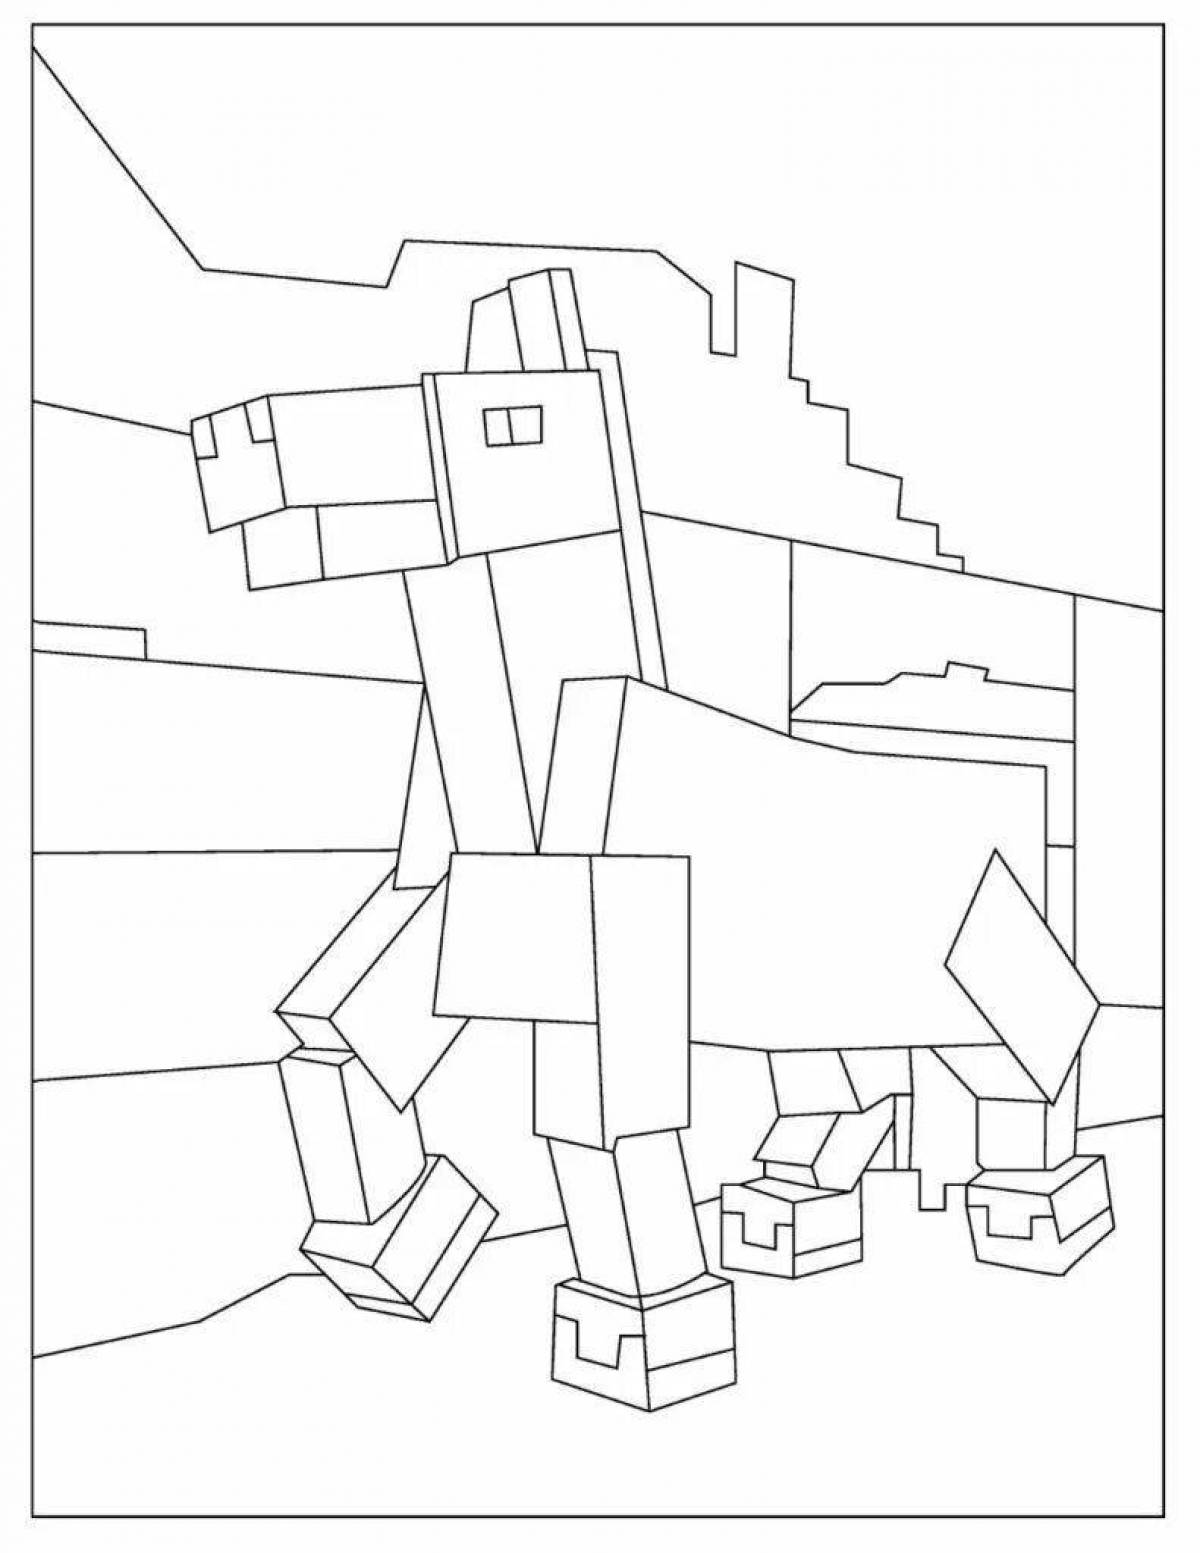 Updated minecraft visor coloring page